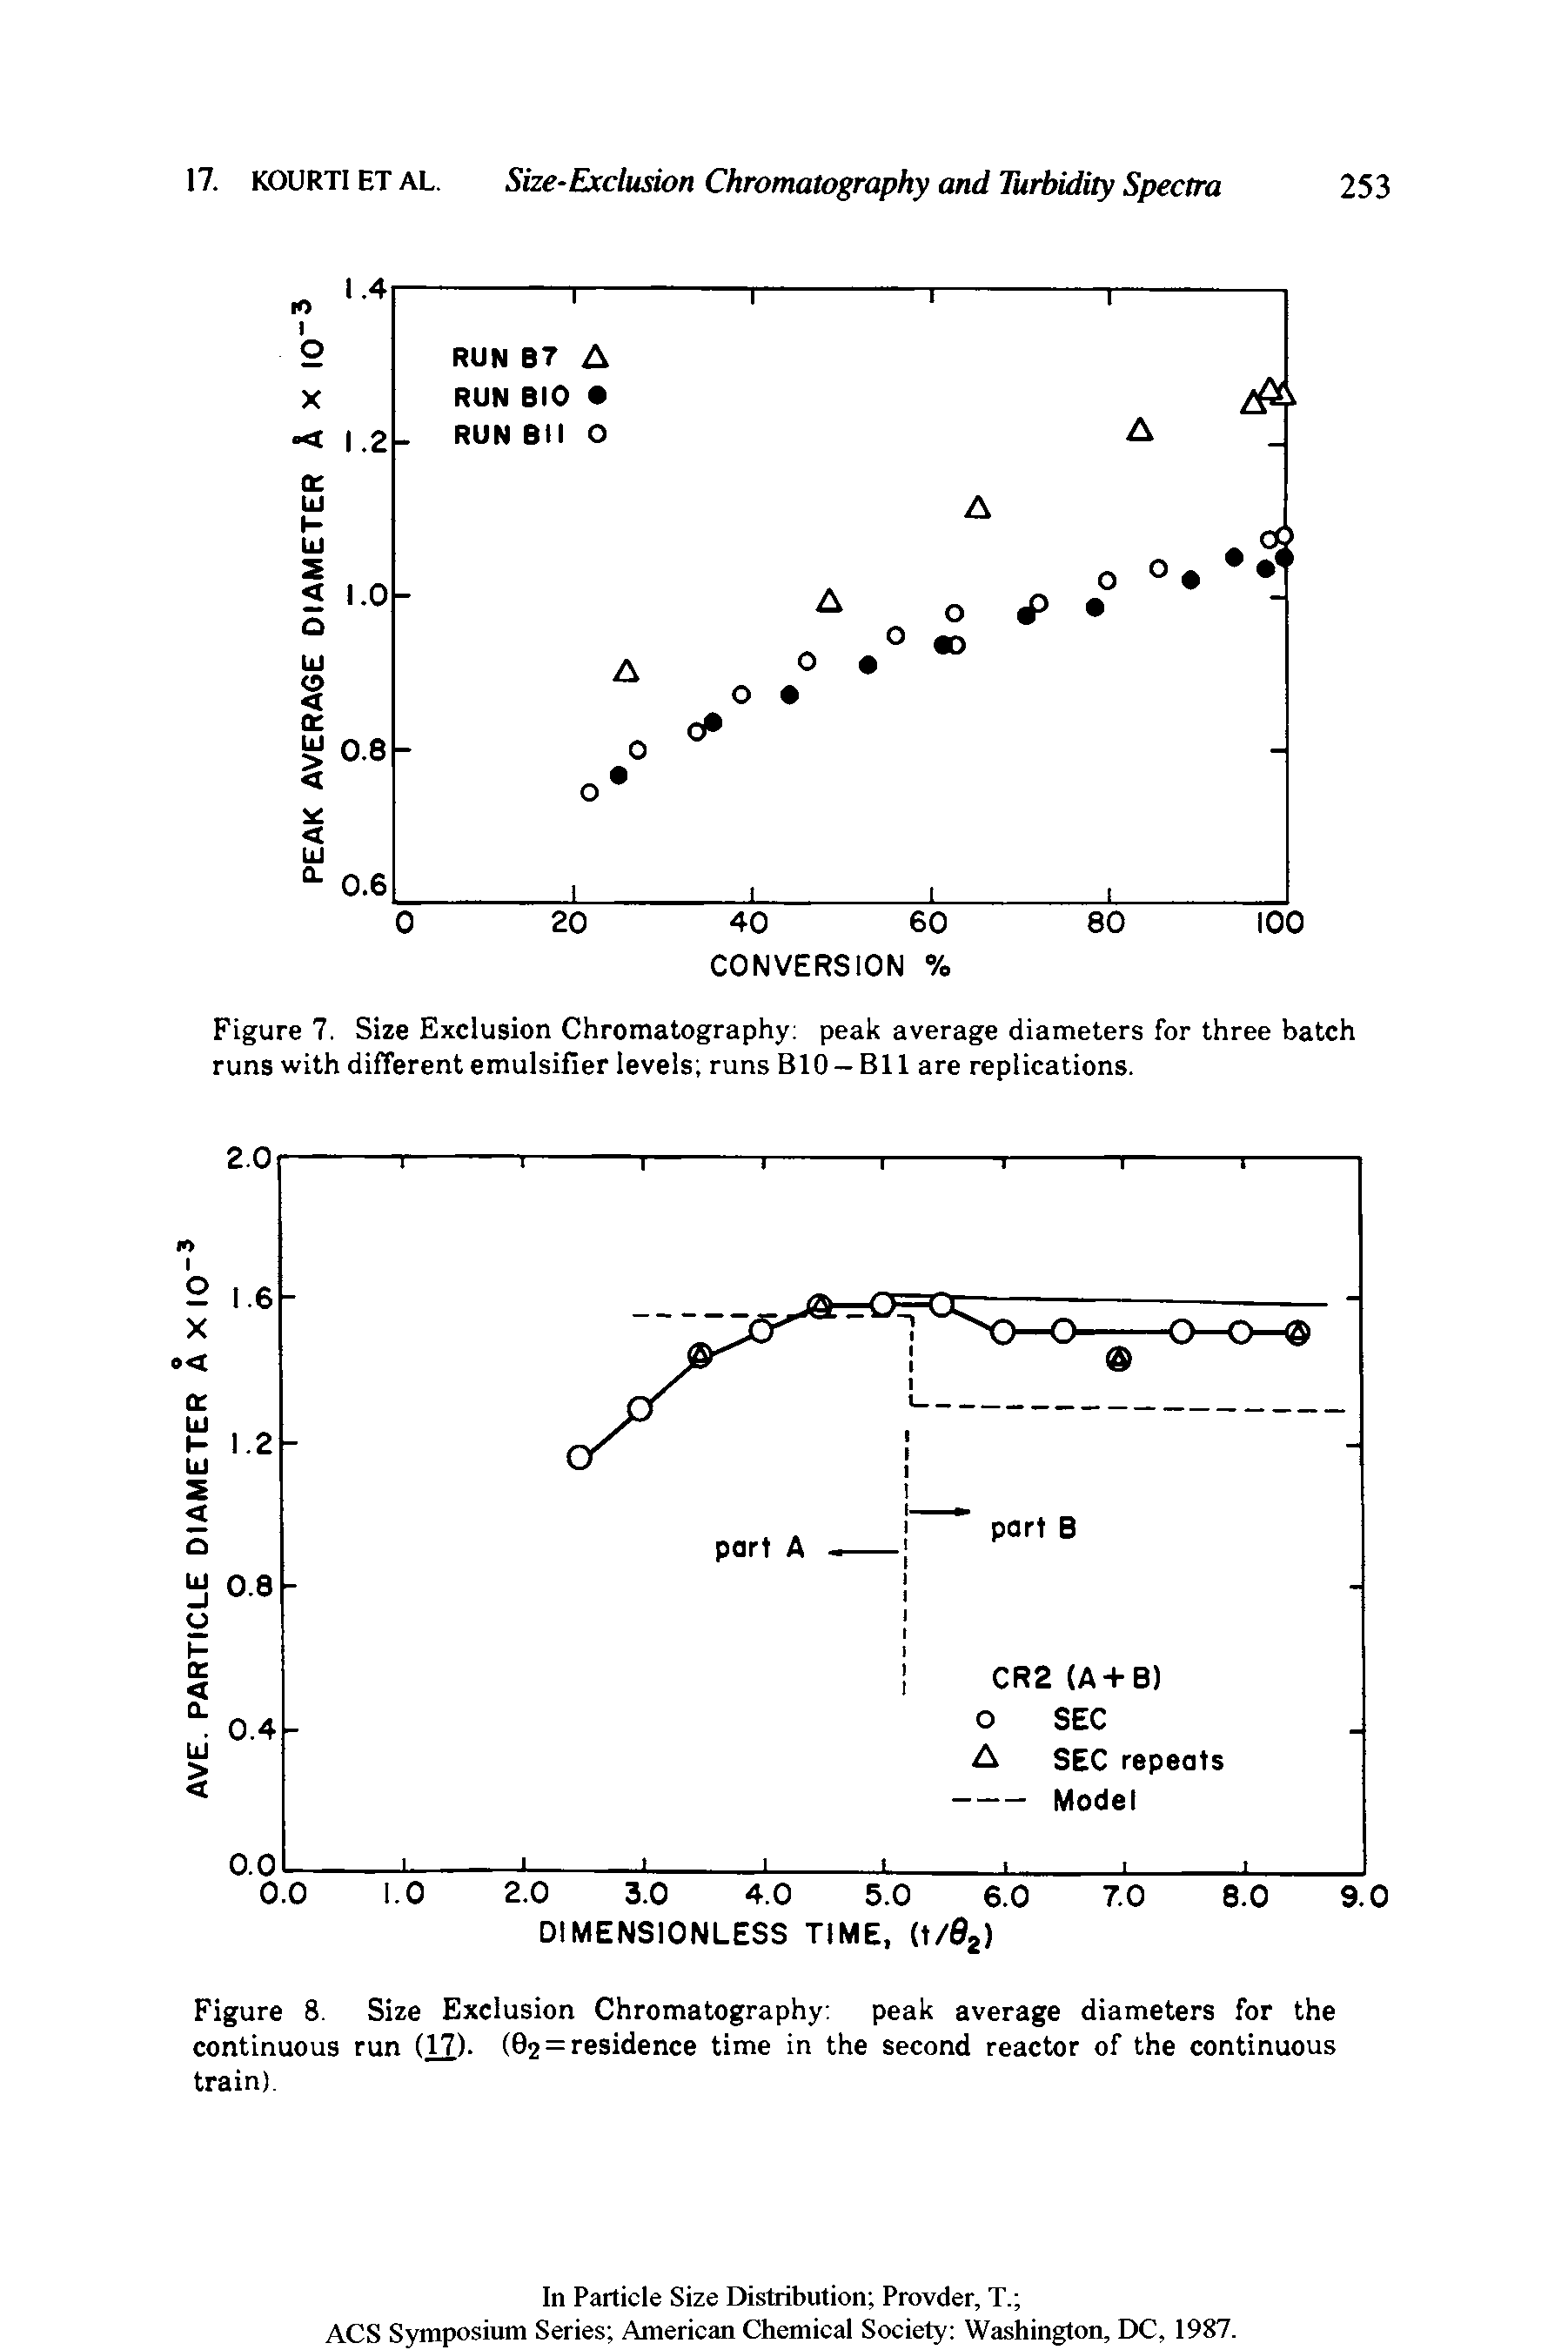 Figure 7. Size Exclusion Chromatography peak average diameters for three batch runs with different emulsifier levels runs BIO — Bll are replications.